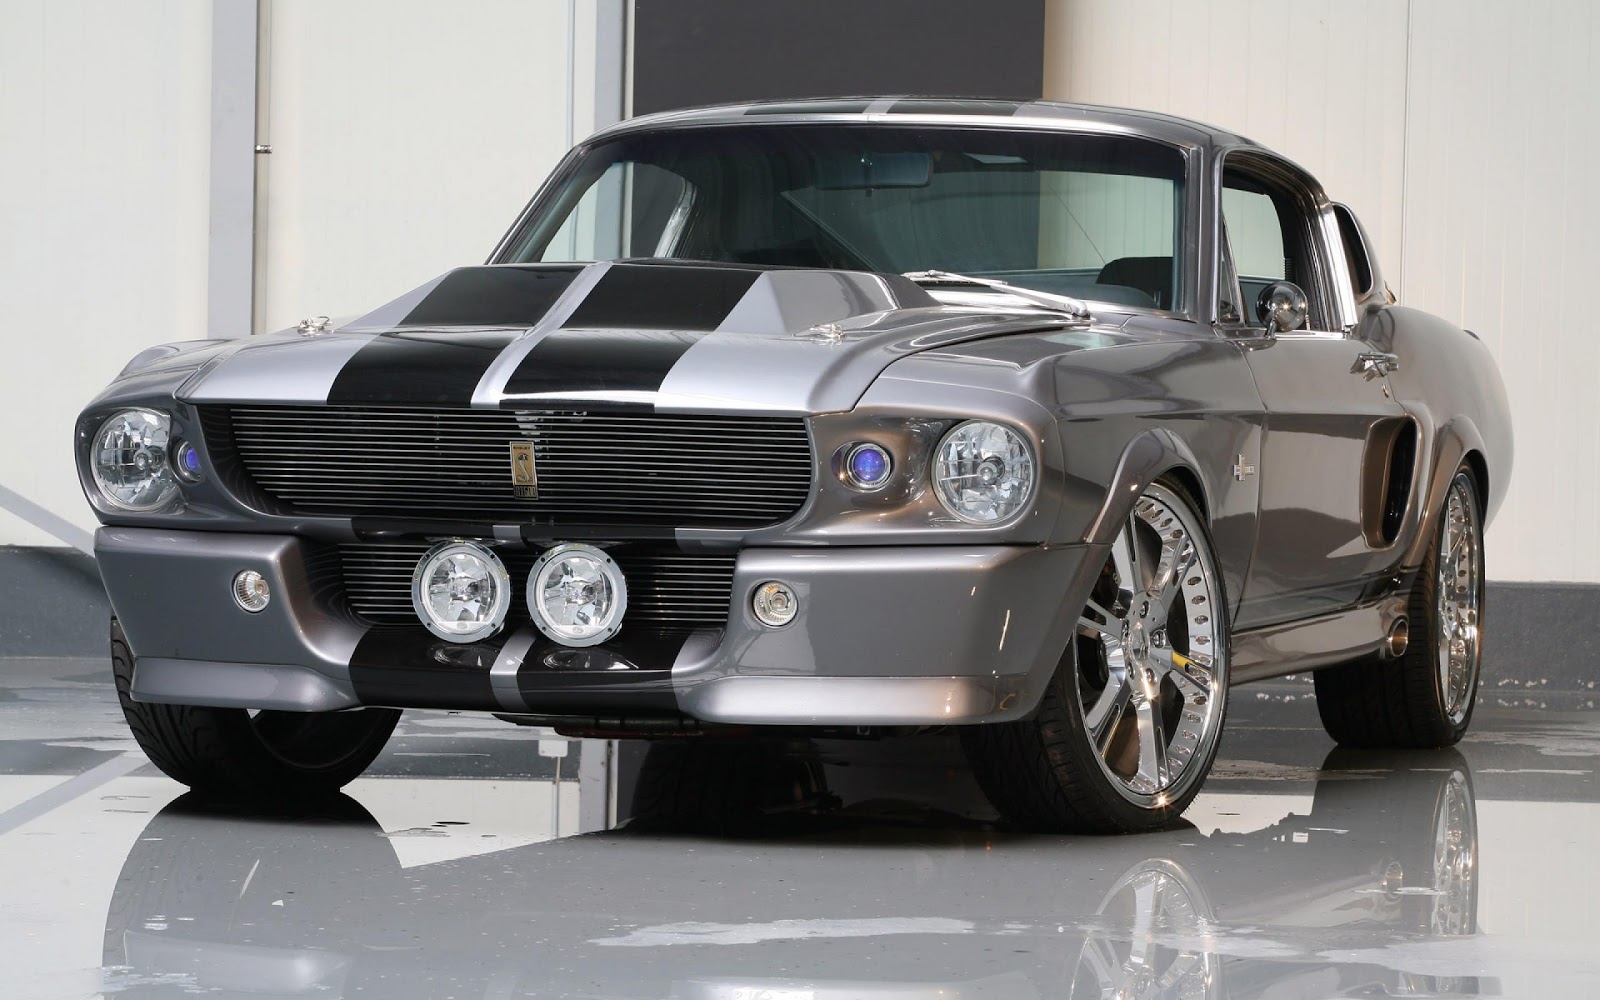 Ford mustang shelby gt500 eleanor price india #6